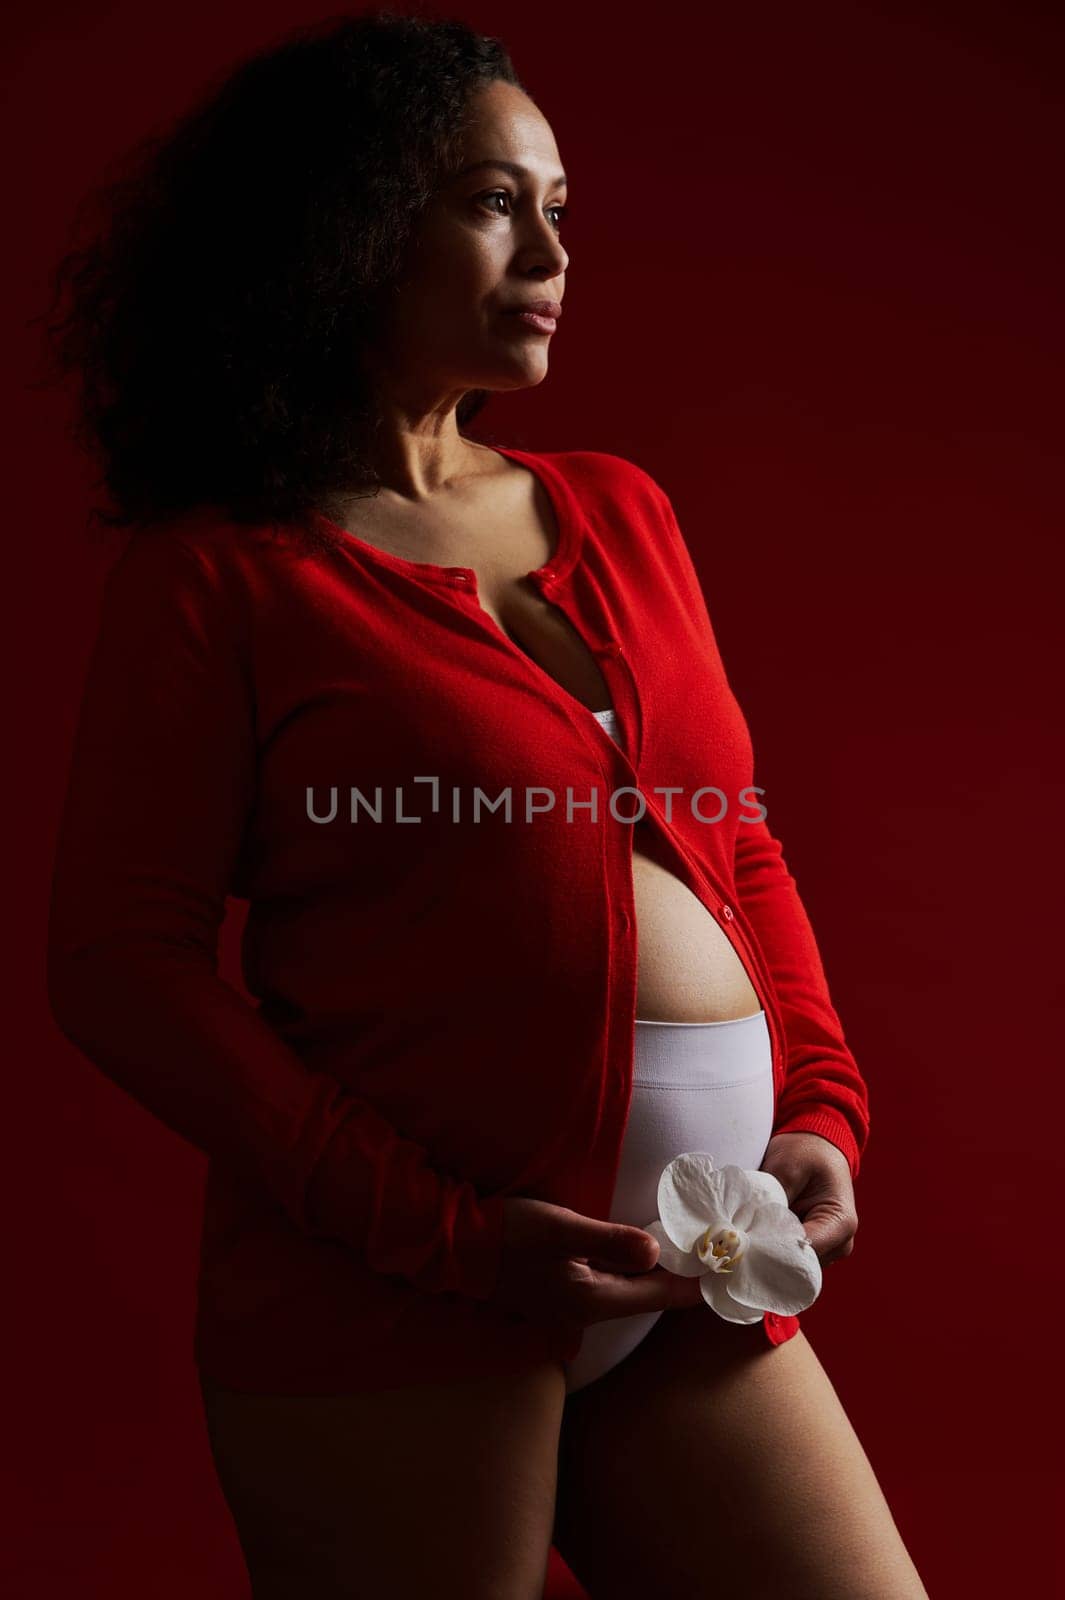 Latin American ethnic woman in red shirt, holding white orchid flower over her pregnant belly, looking dreamily aside by artgf